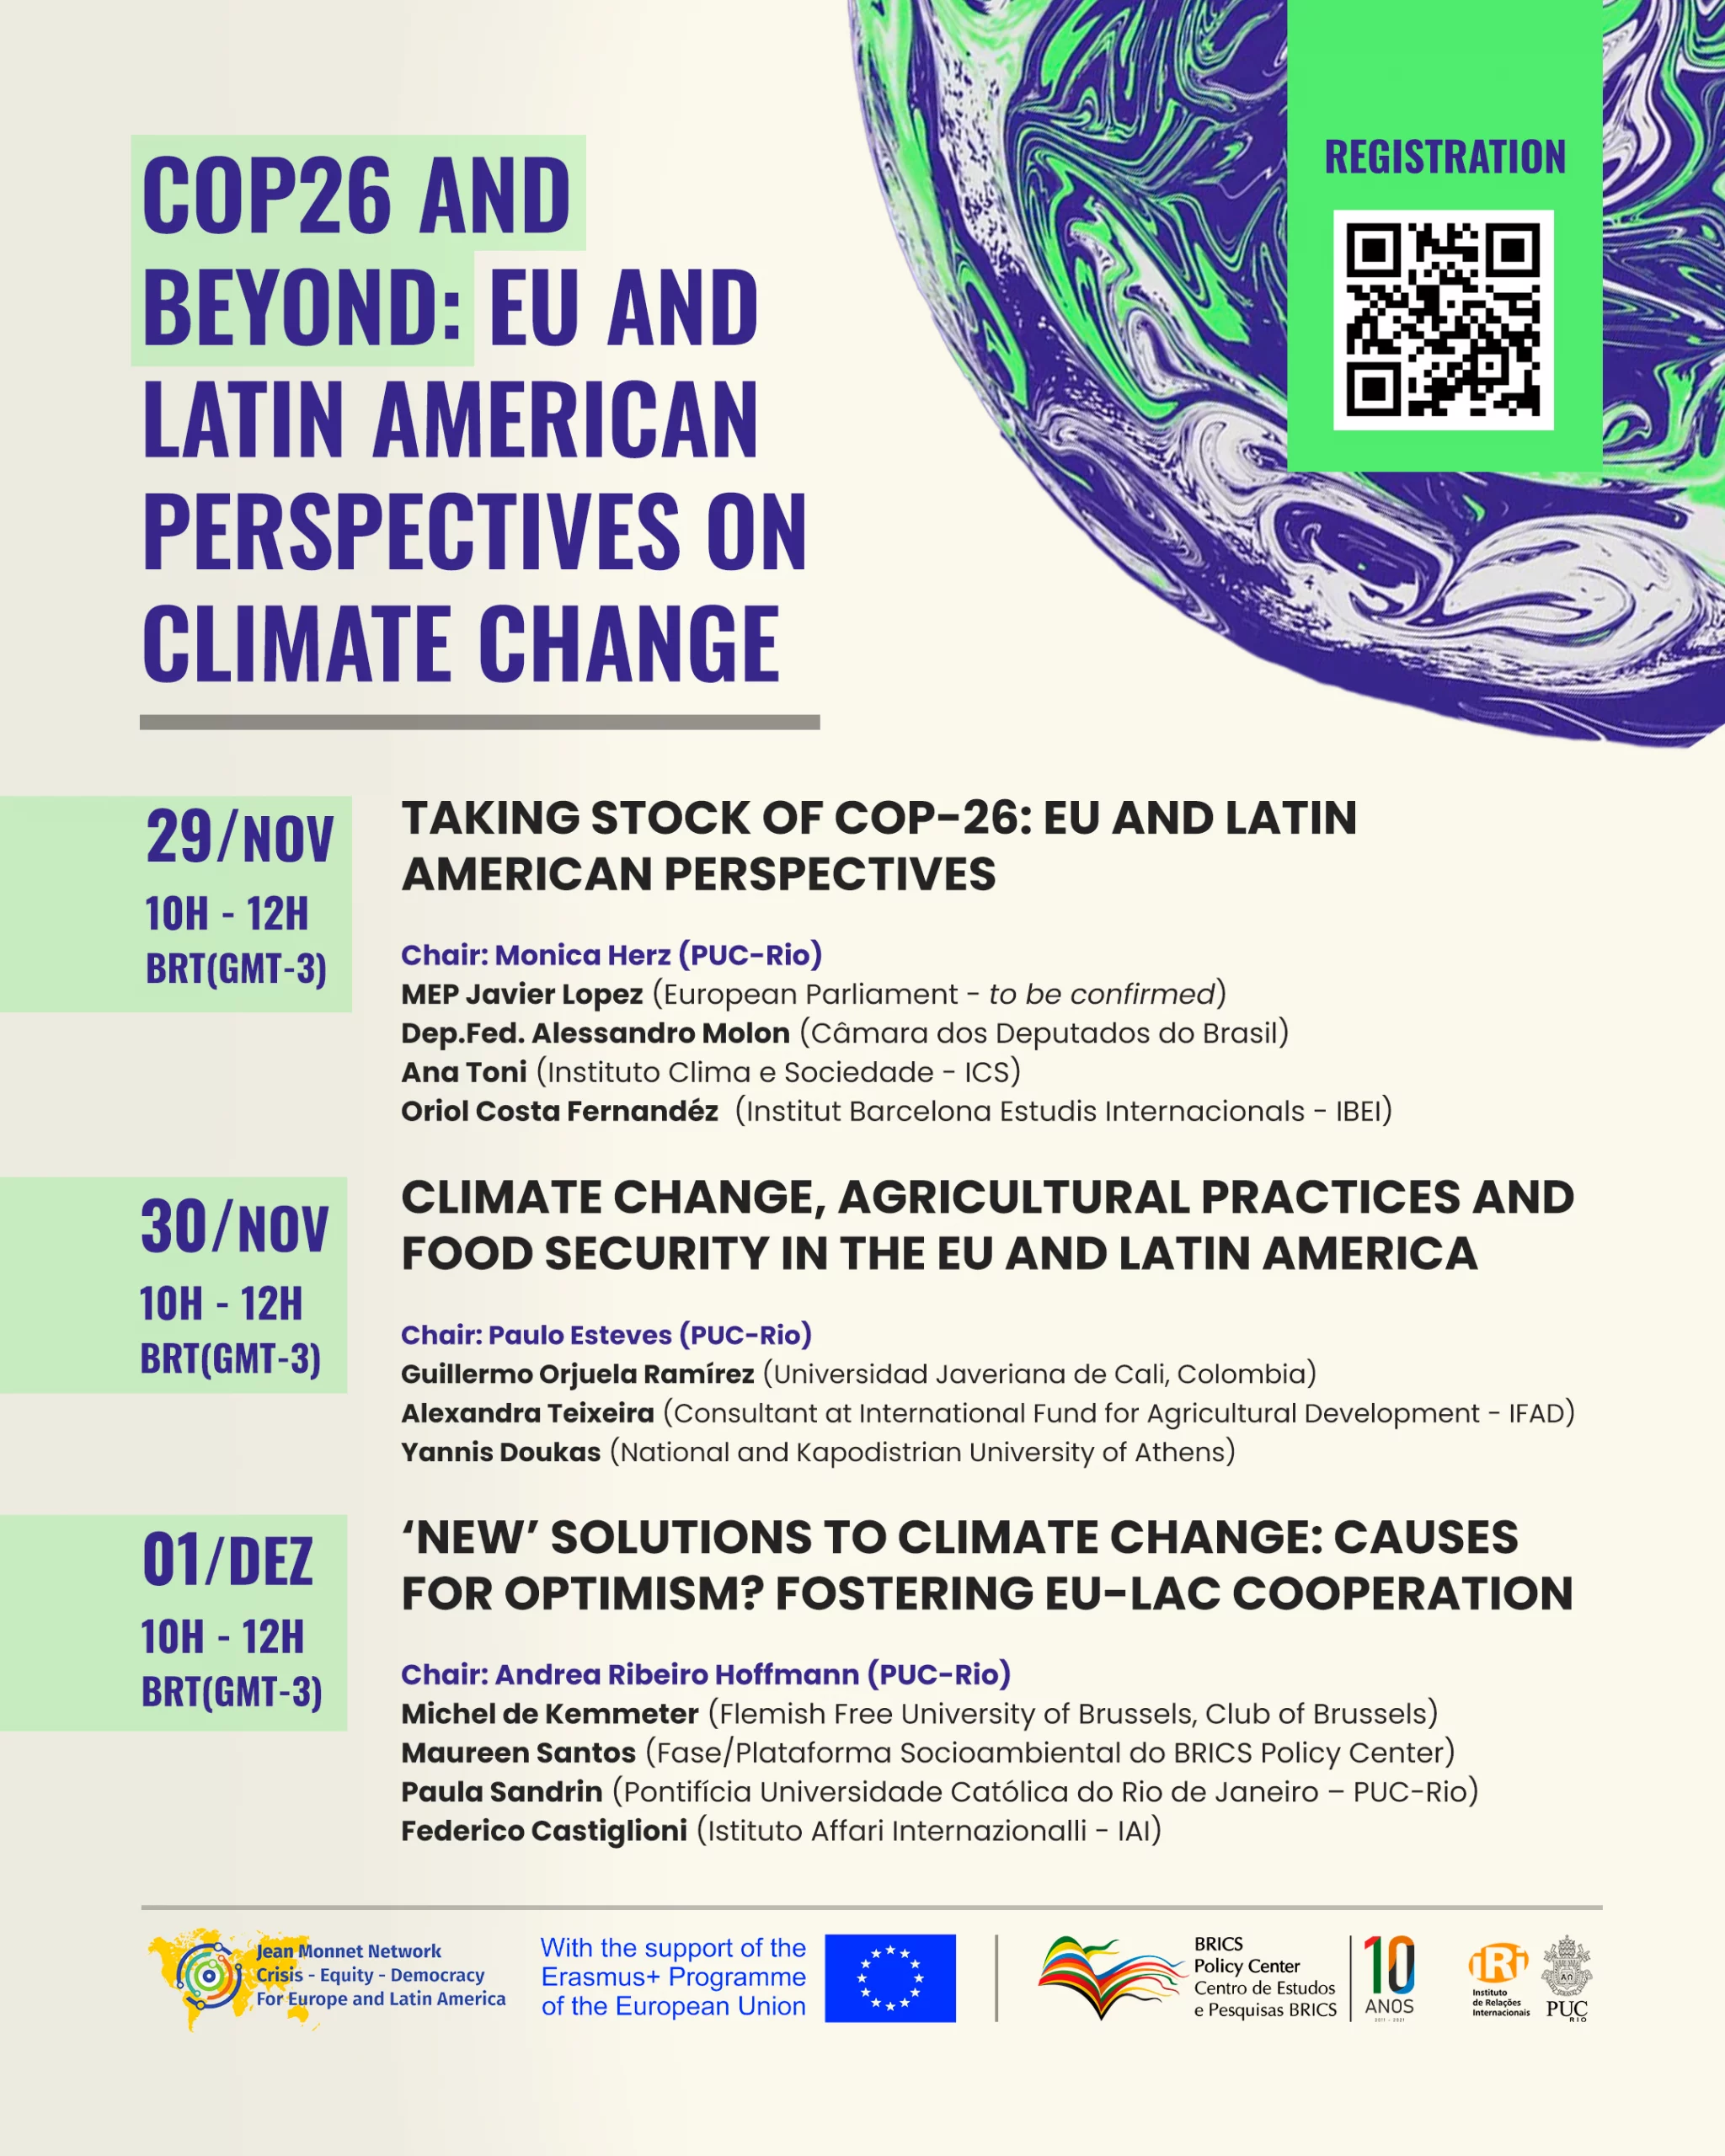 COP26 And Beyond: EU And Latin American Perspectives On Climate Change